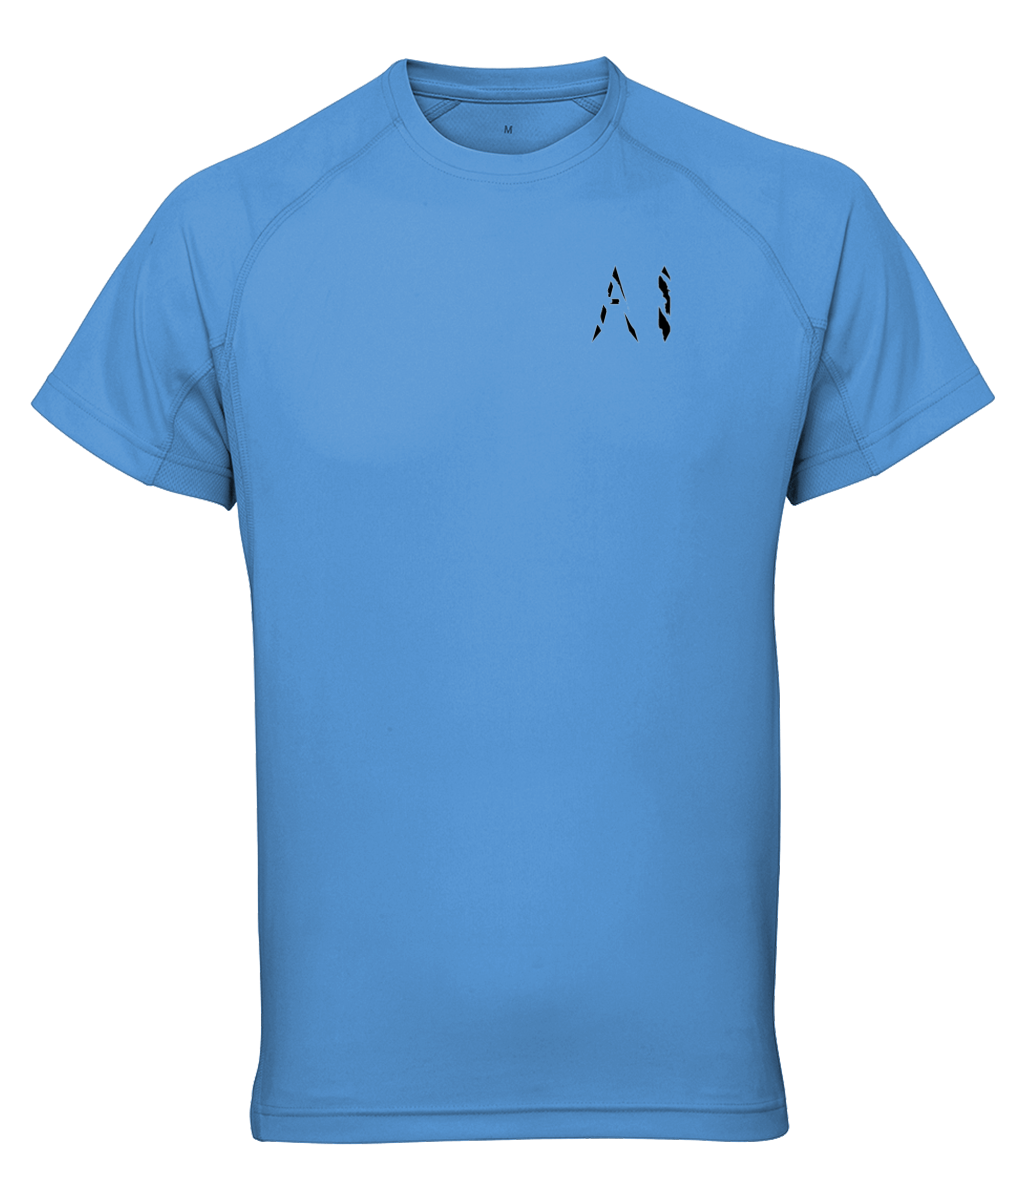 Womens baby blue Athletic Performance Top with black AI logo on left breast